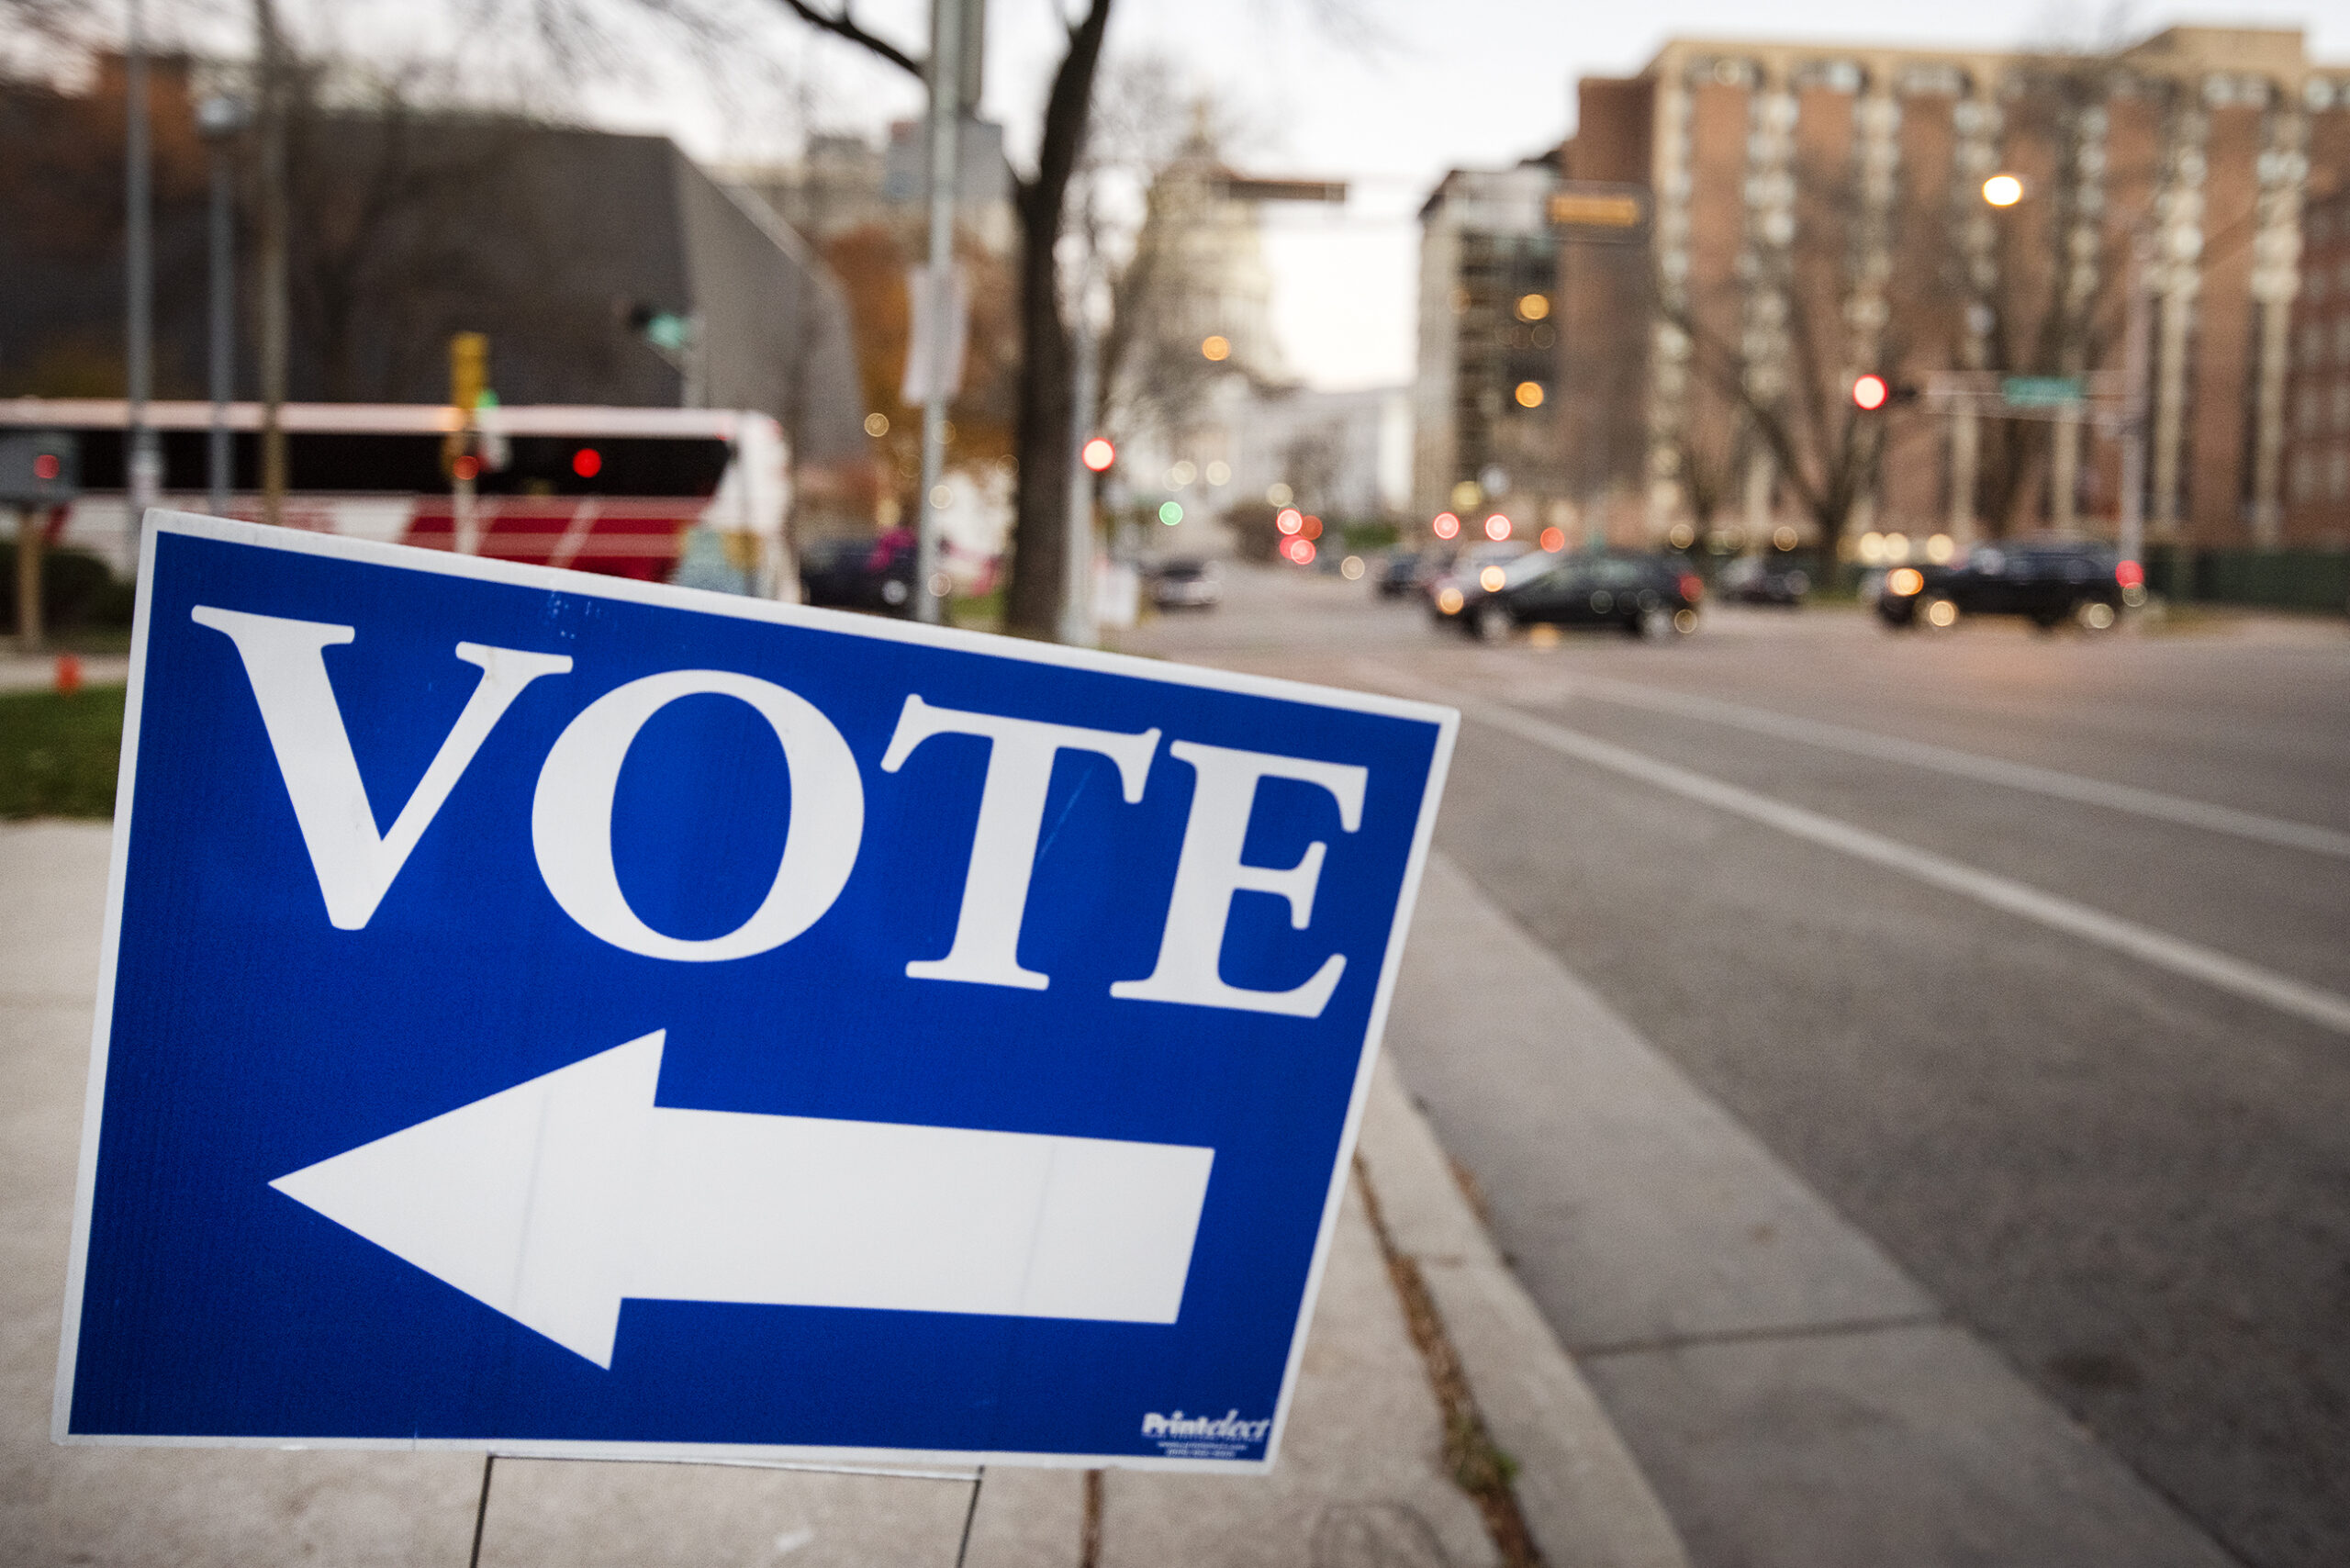 a blue sign says "VOTE" with an arrow